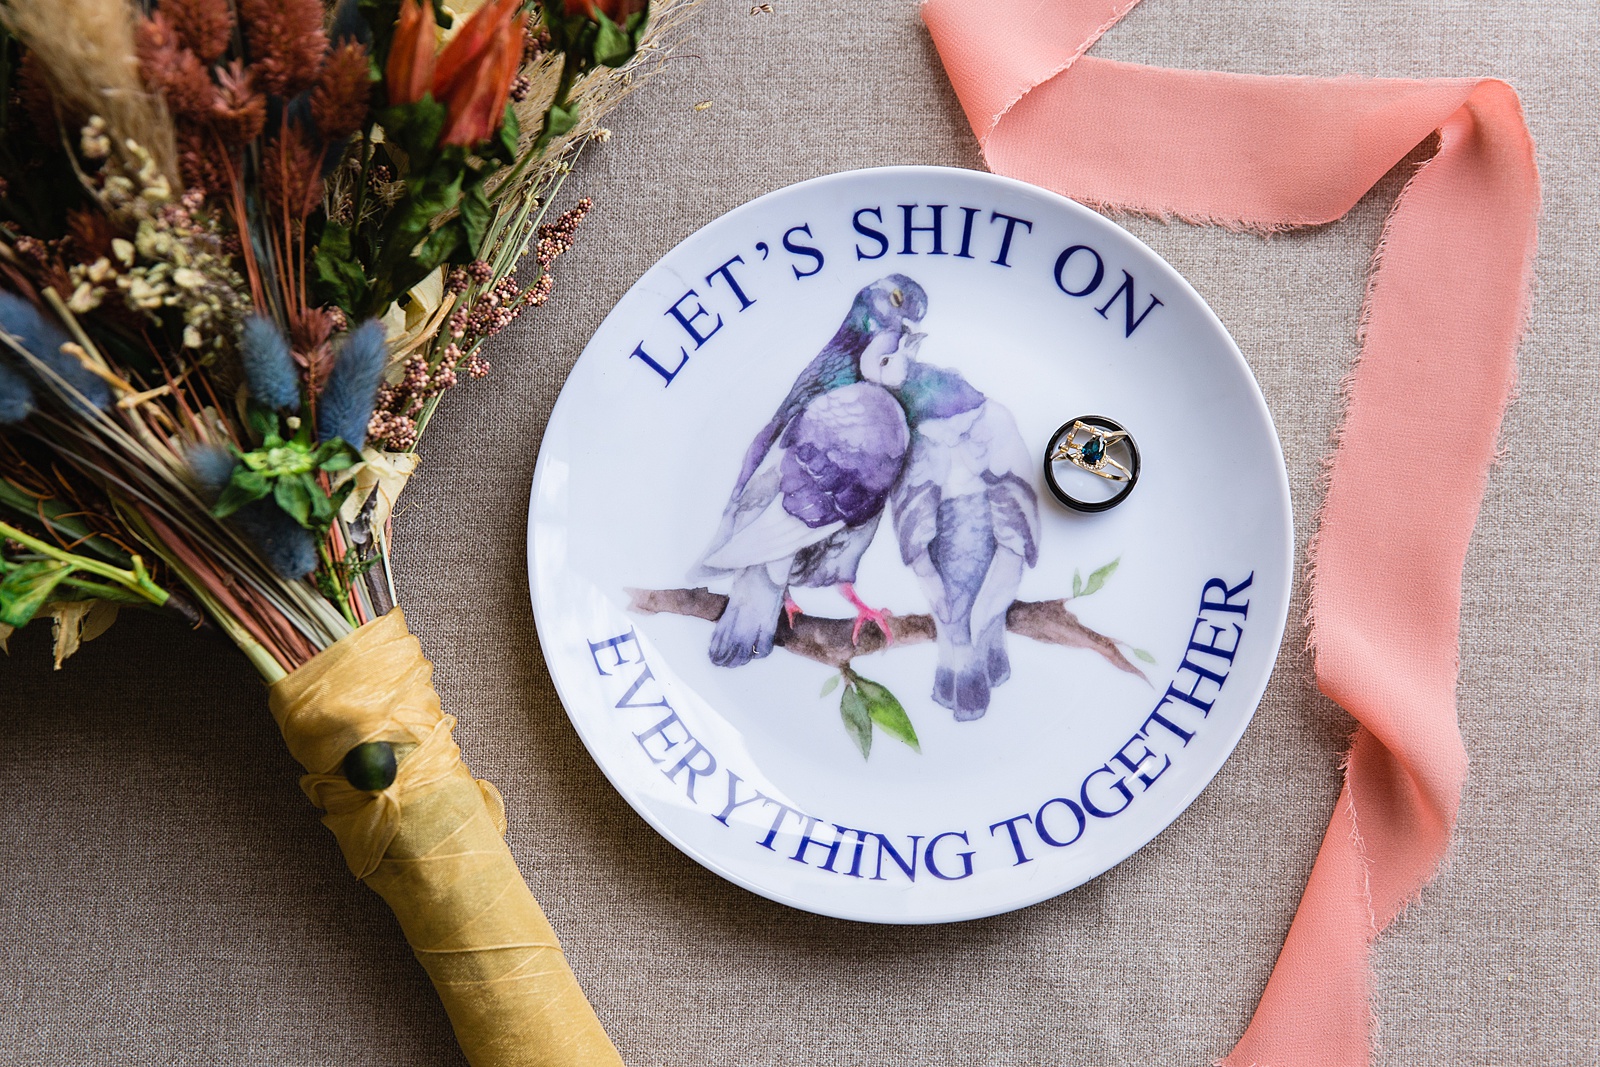 Funny wedding ring plate that says "let's shit on everything together" with an image of birds by Phoenix wedding photographer PMA Photography.